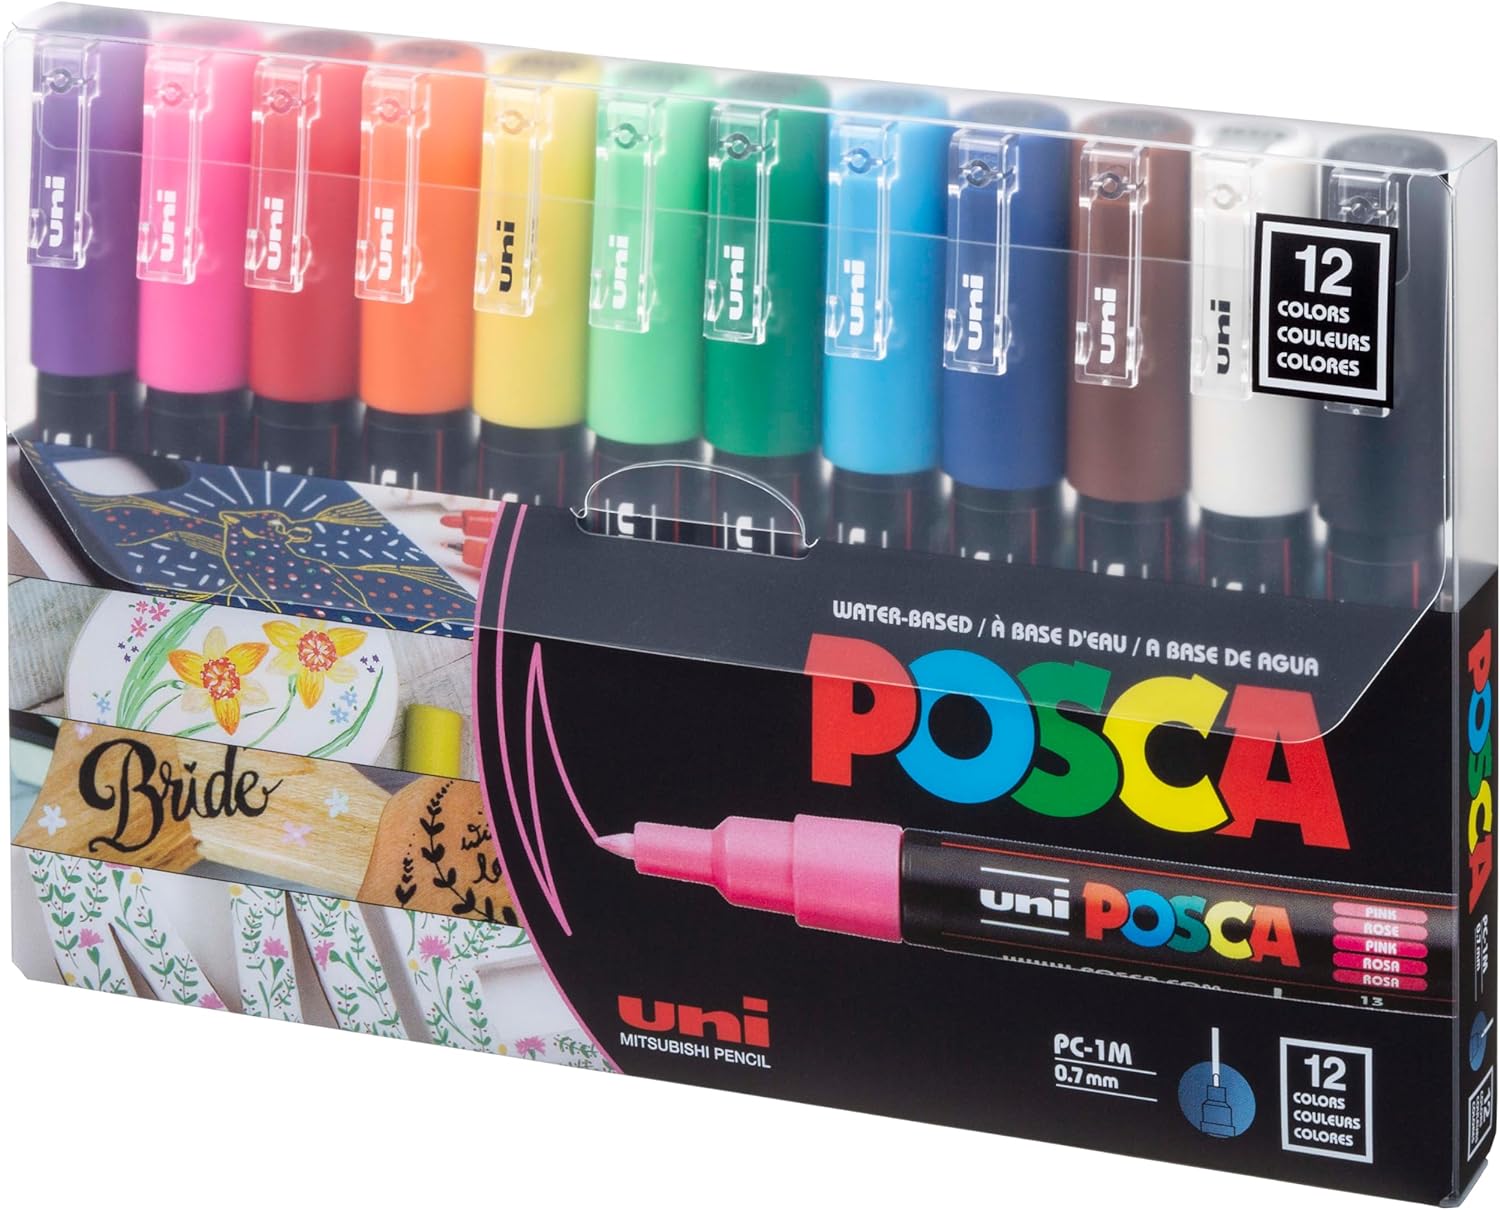 UNI POSCA PC-1M Acrylic Paint Markers,0.7mm Extra Fine Tip,12 Color